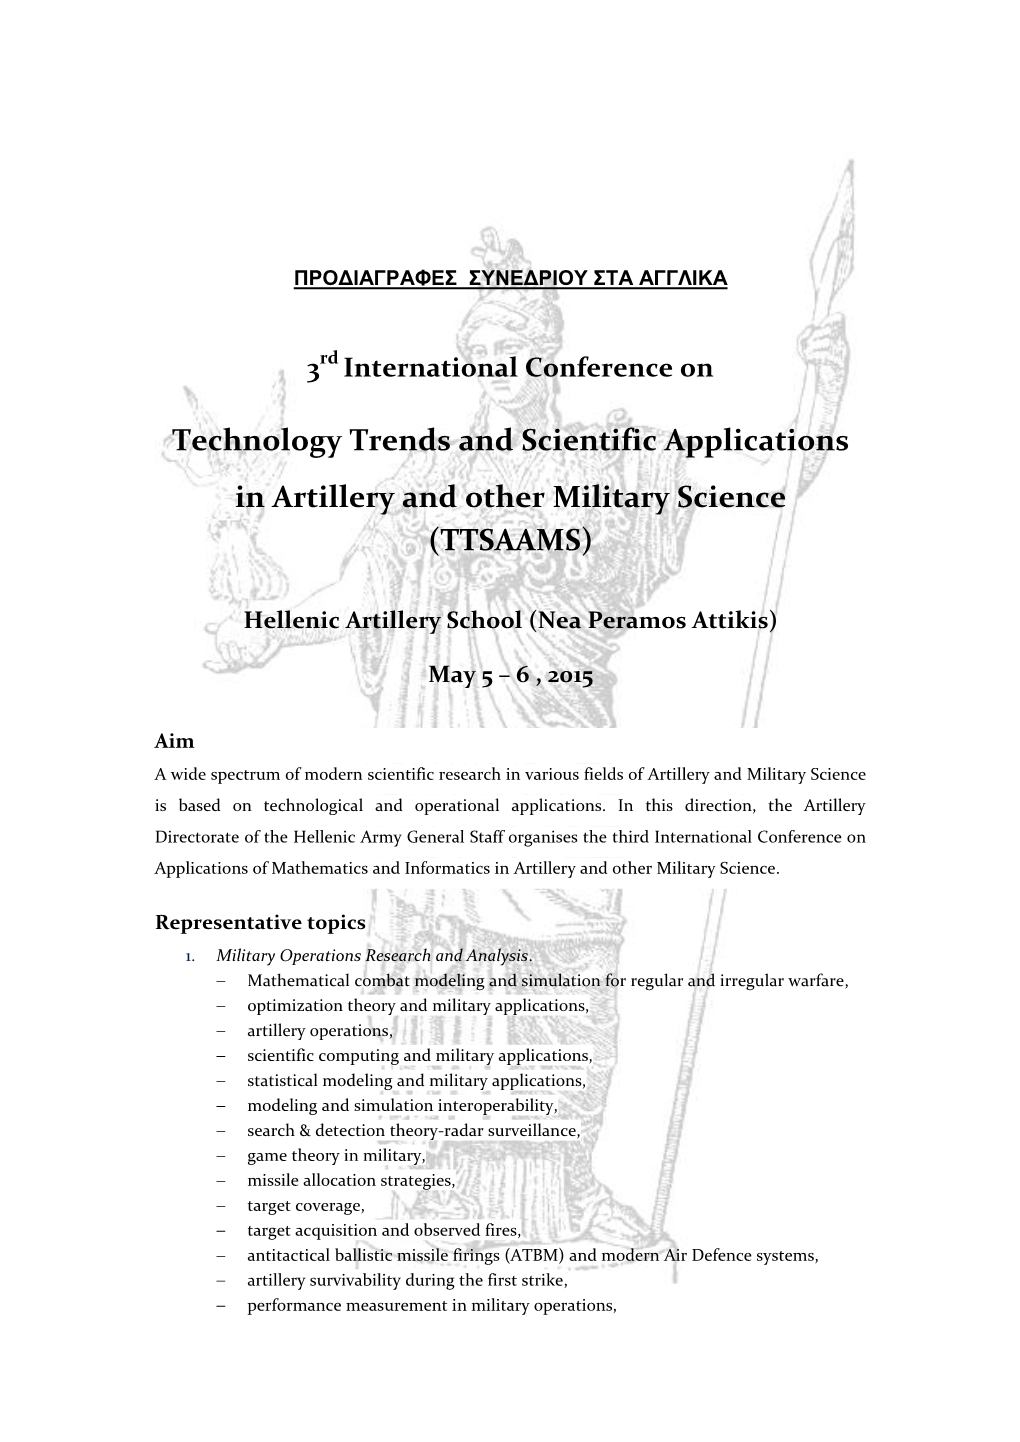 Technology Trends and Scientific Applications in Artillery and Other Military Science (TTSAAMS)